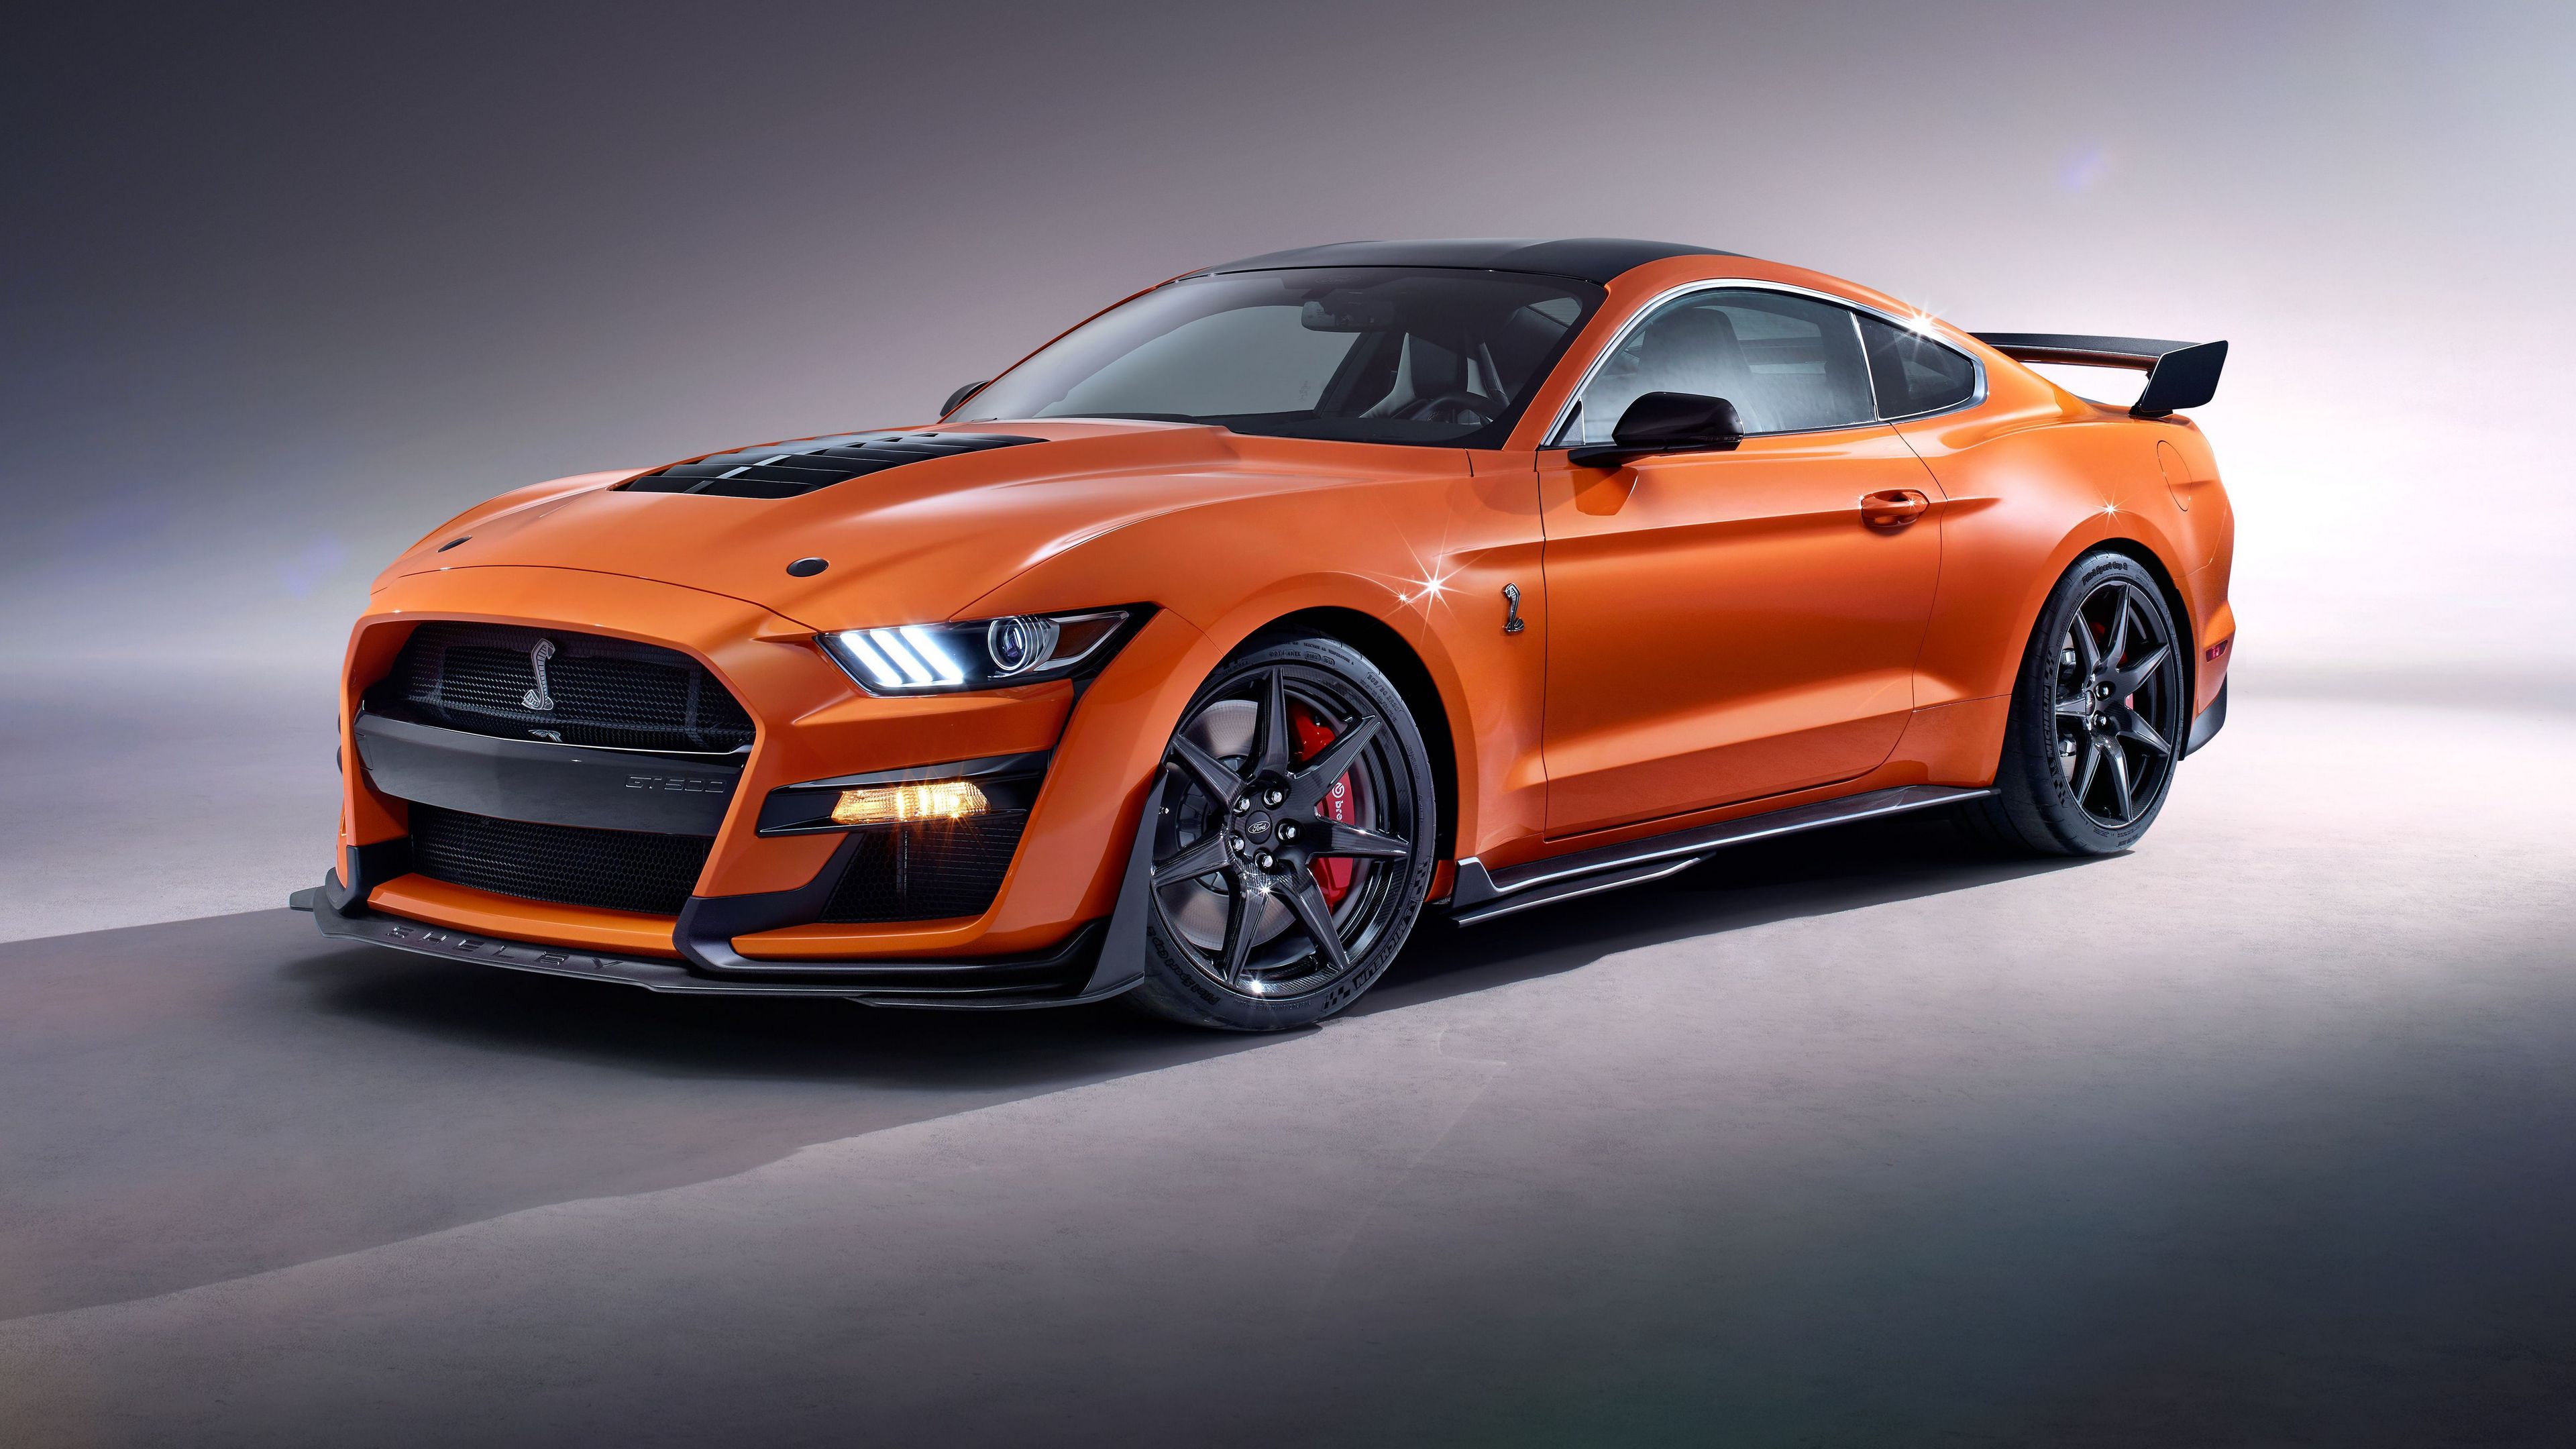 Ford Mustang Shelby Ford Mustang Orange Cars Ford Vehicle 3840x2160